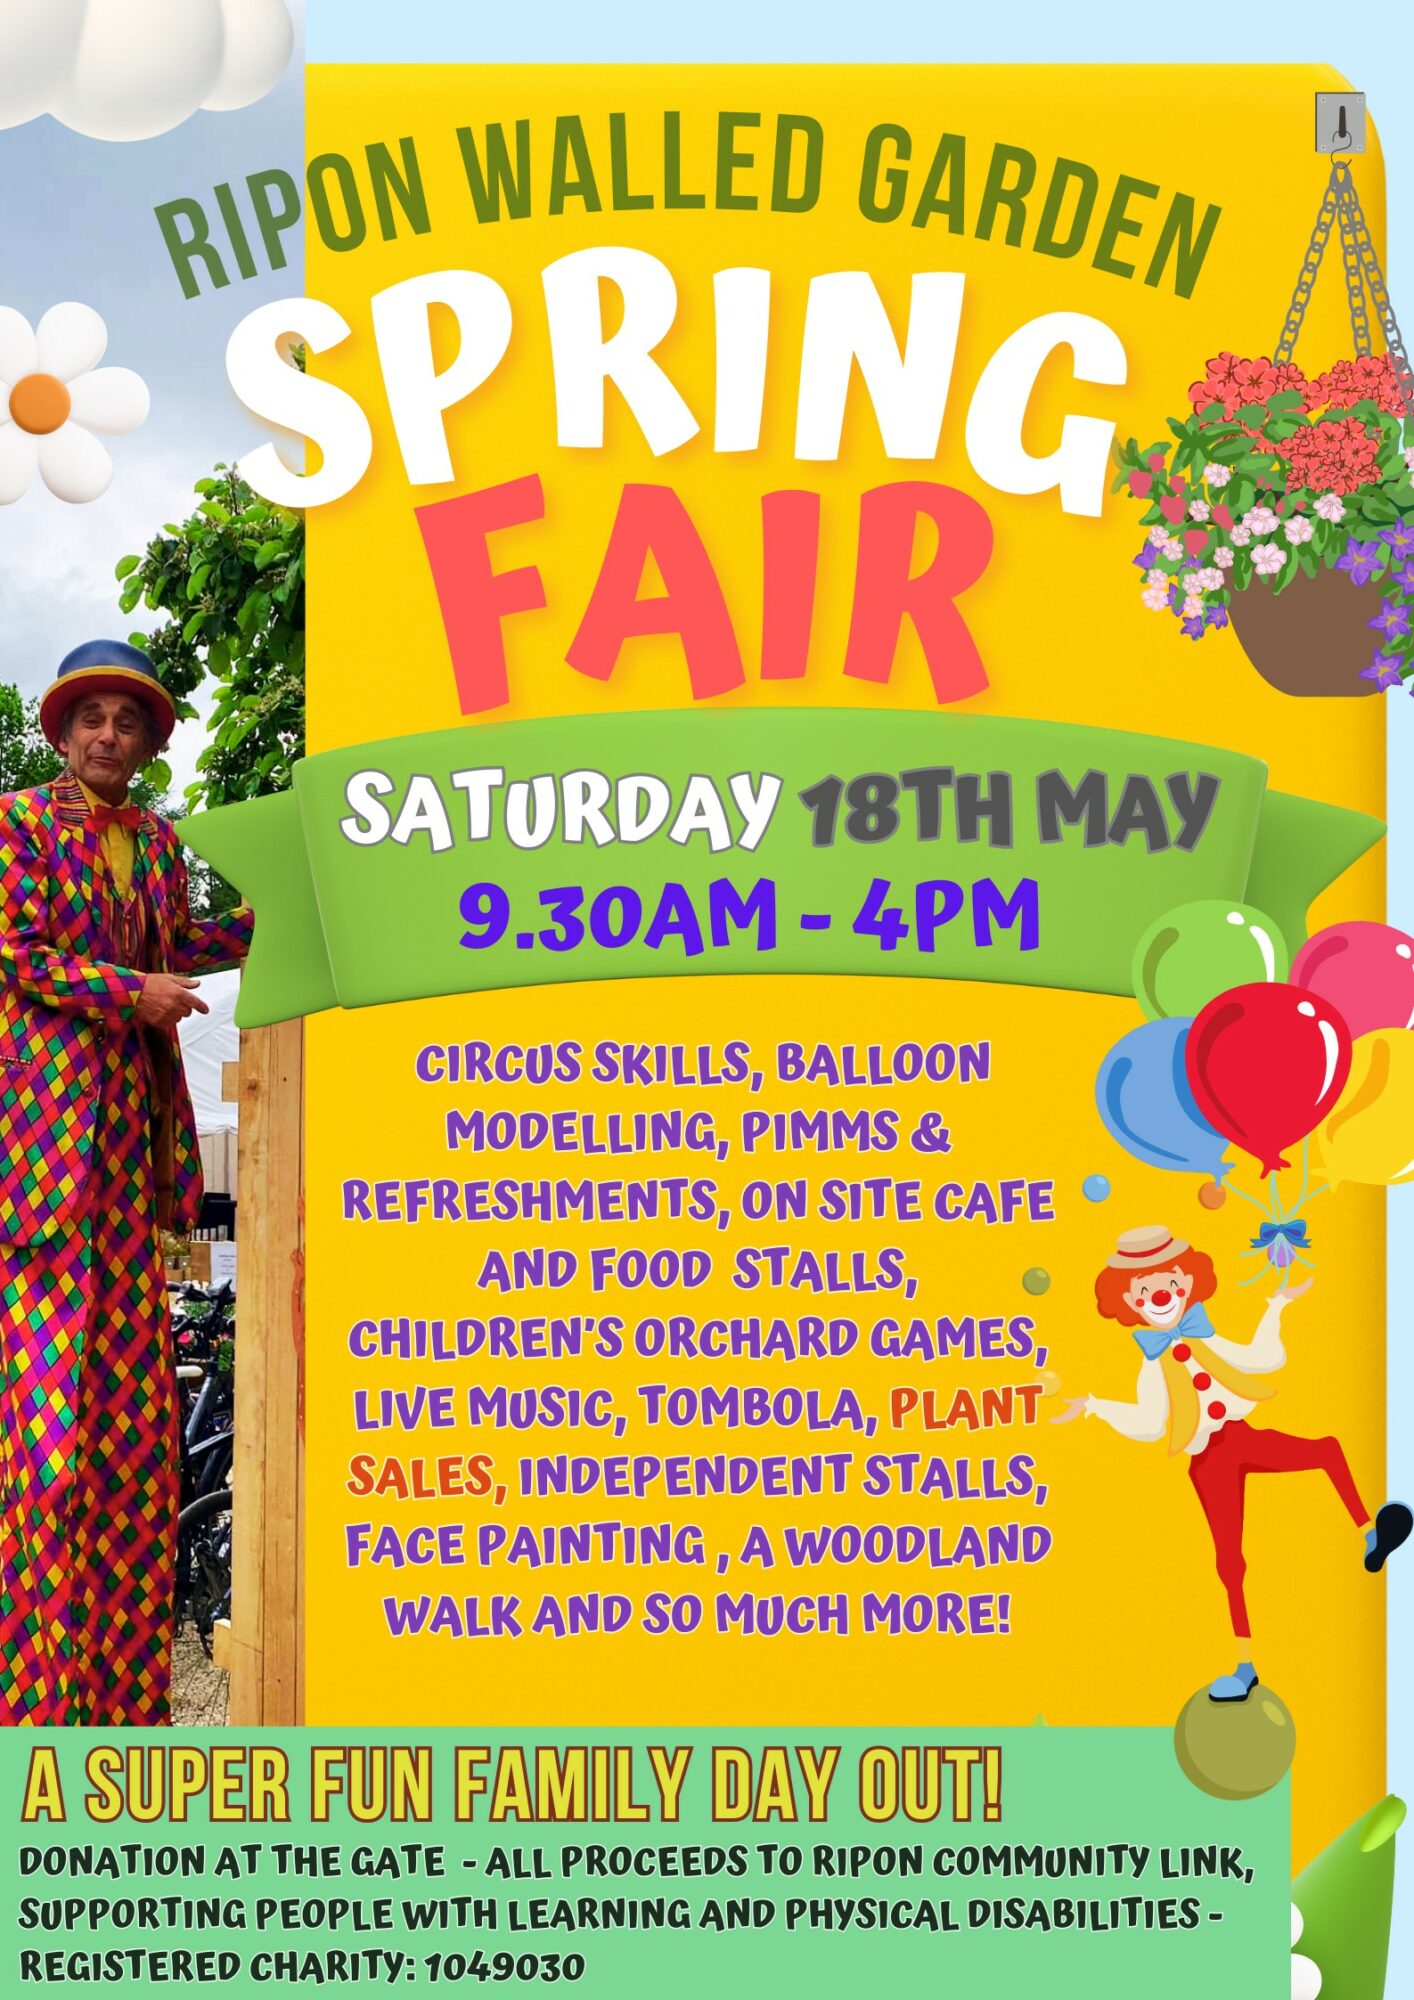 Image name spring fair poster final the 4 image from the post Events in Yorkshire.com.